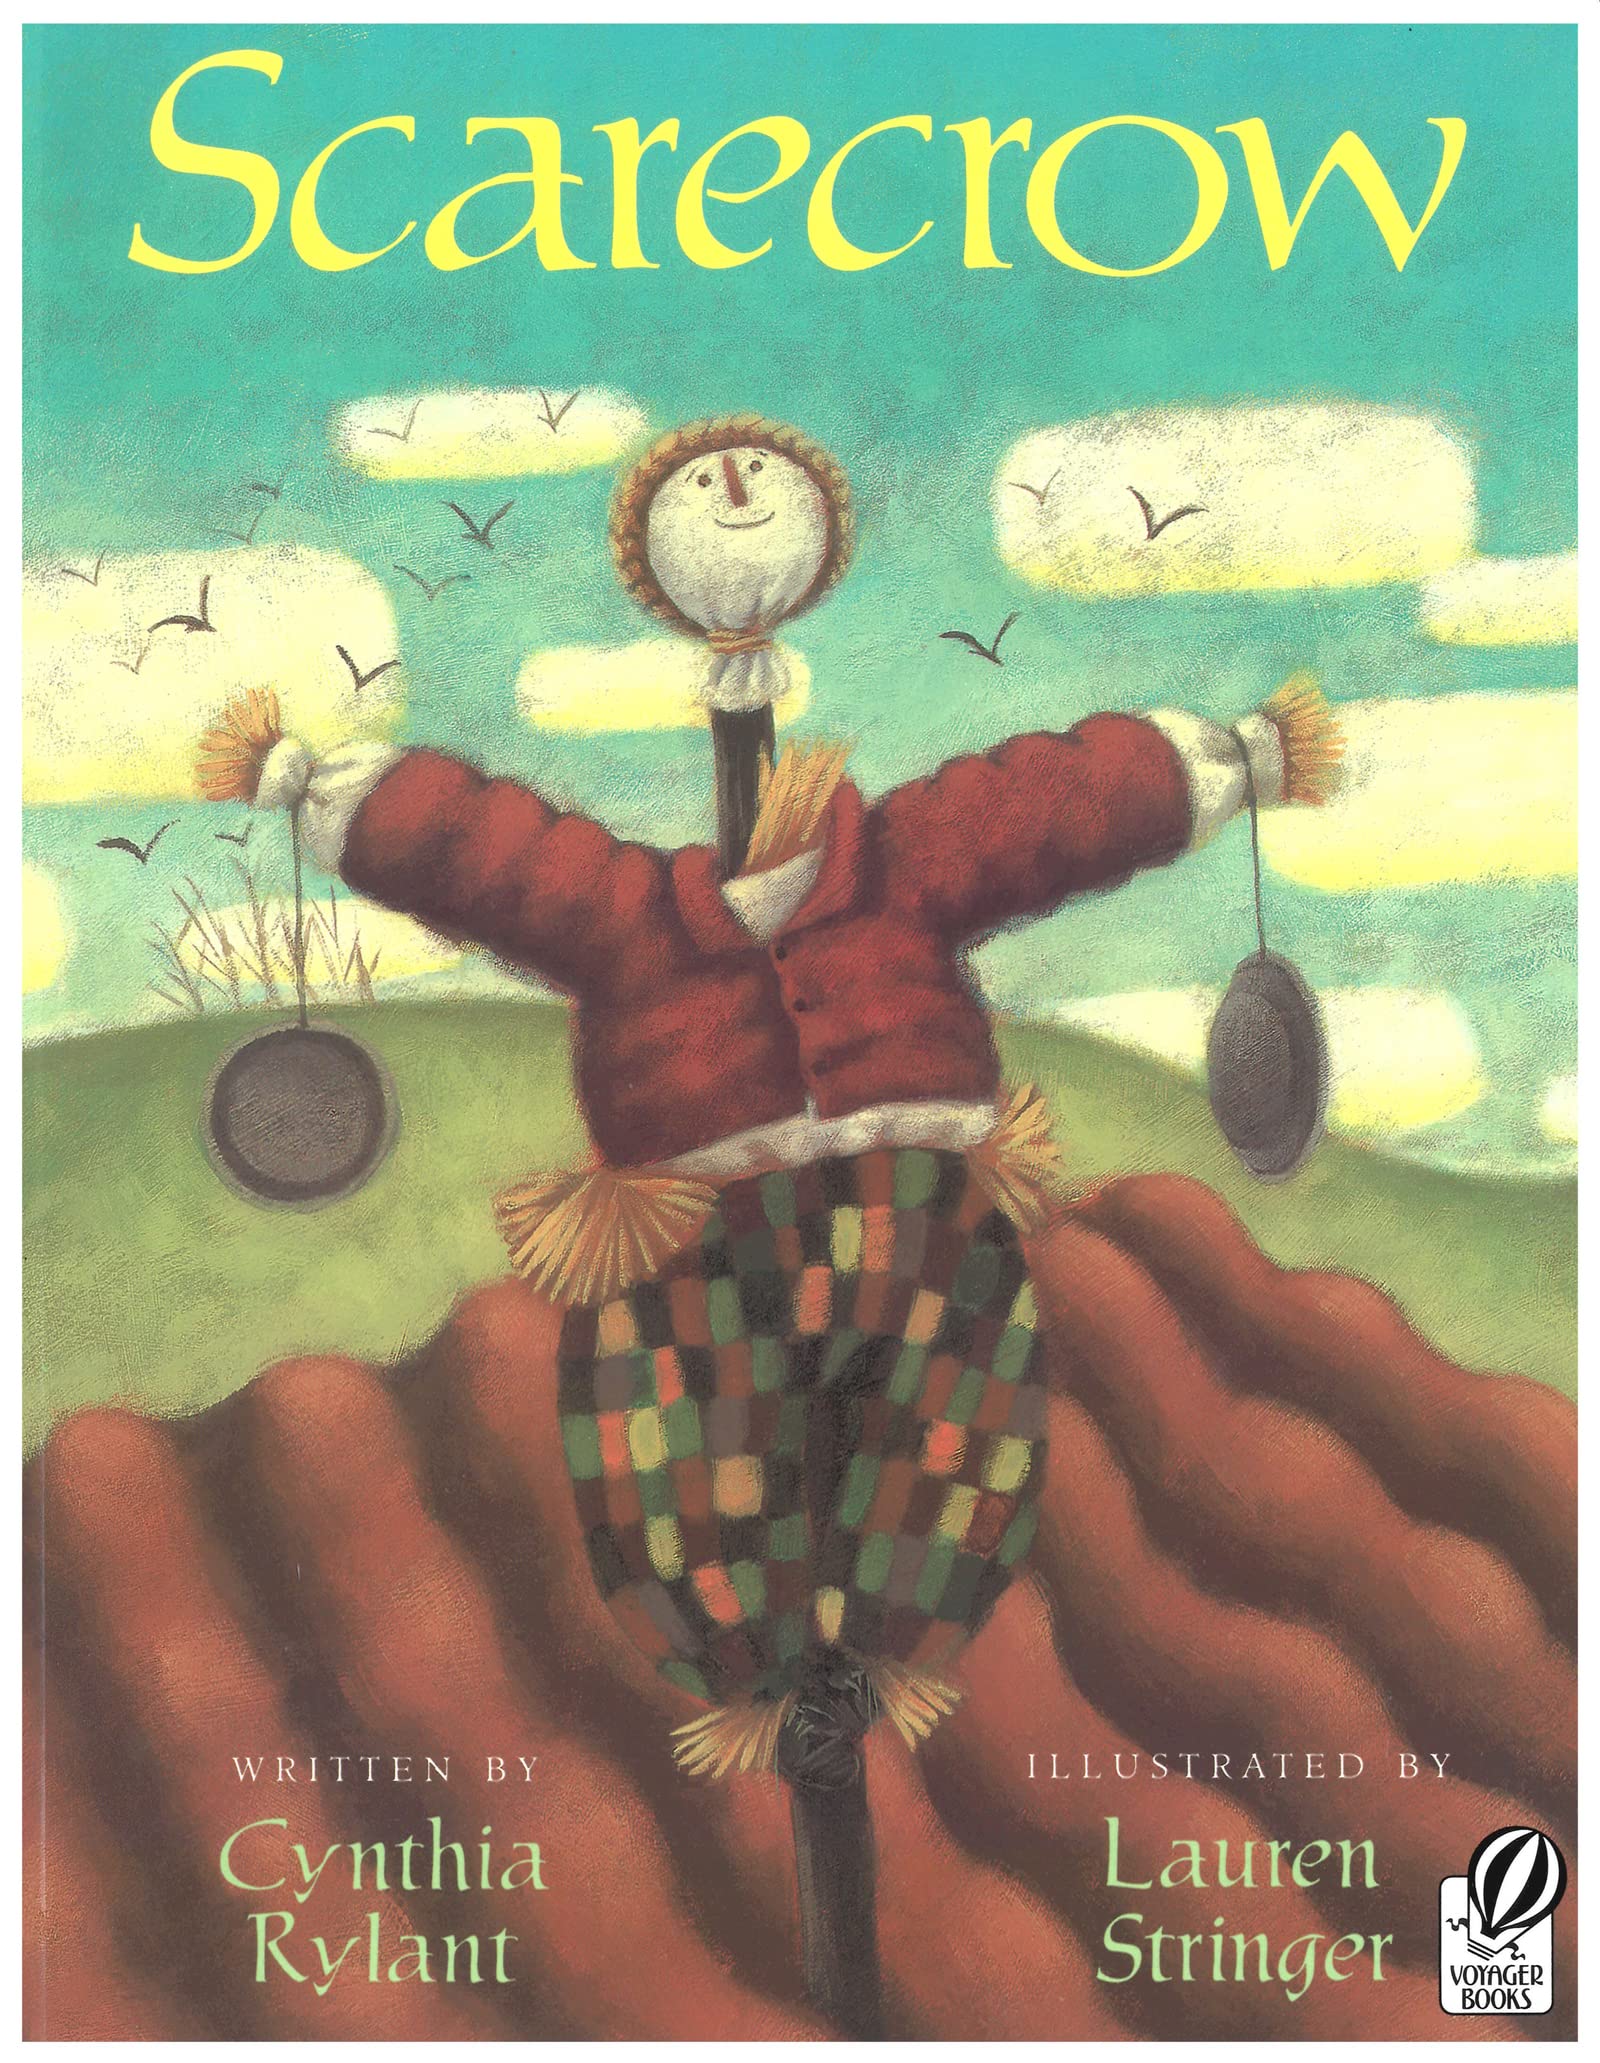 speech and language teaching concepts for Scarecrow in speech therapy​ ​